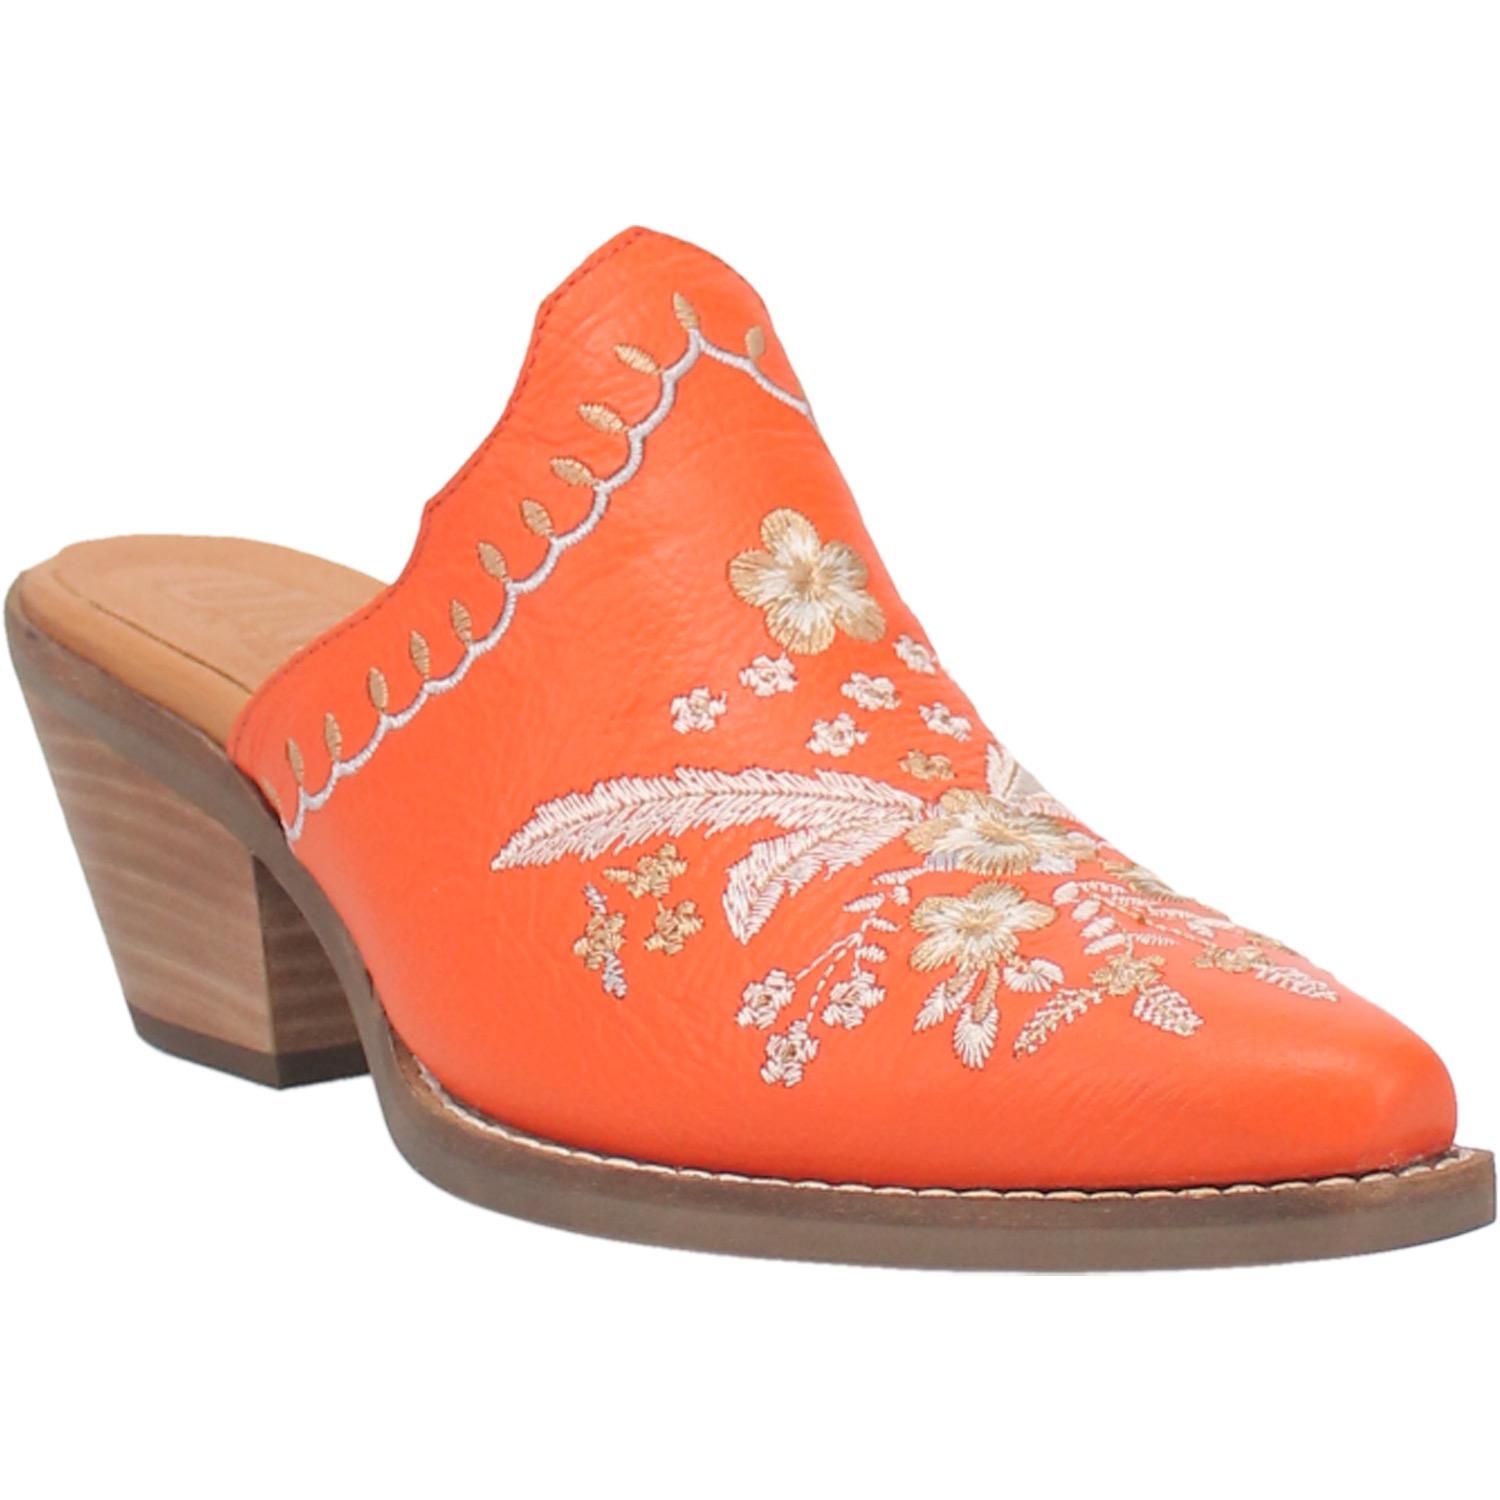 An orange bootie with a white  and cream floral and feather design on the upper, a white and cream stitched design on the edge, and a short heel